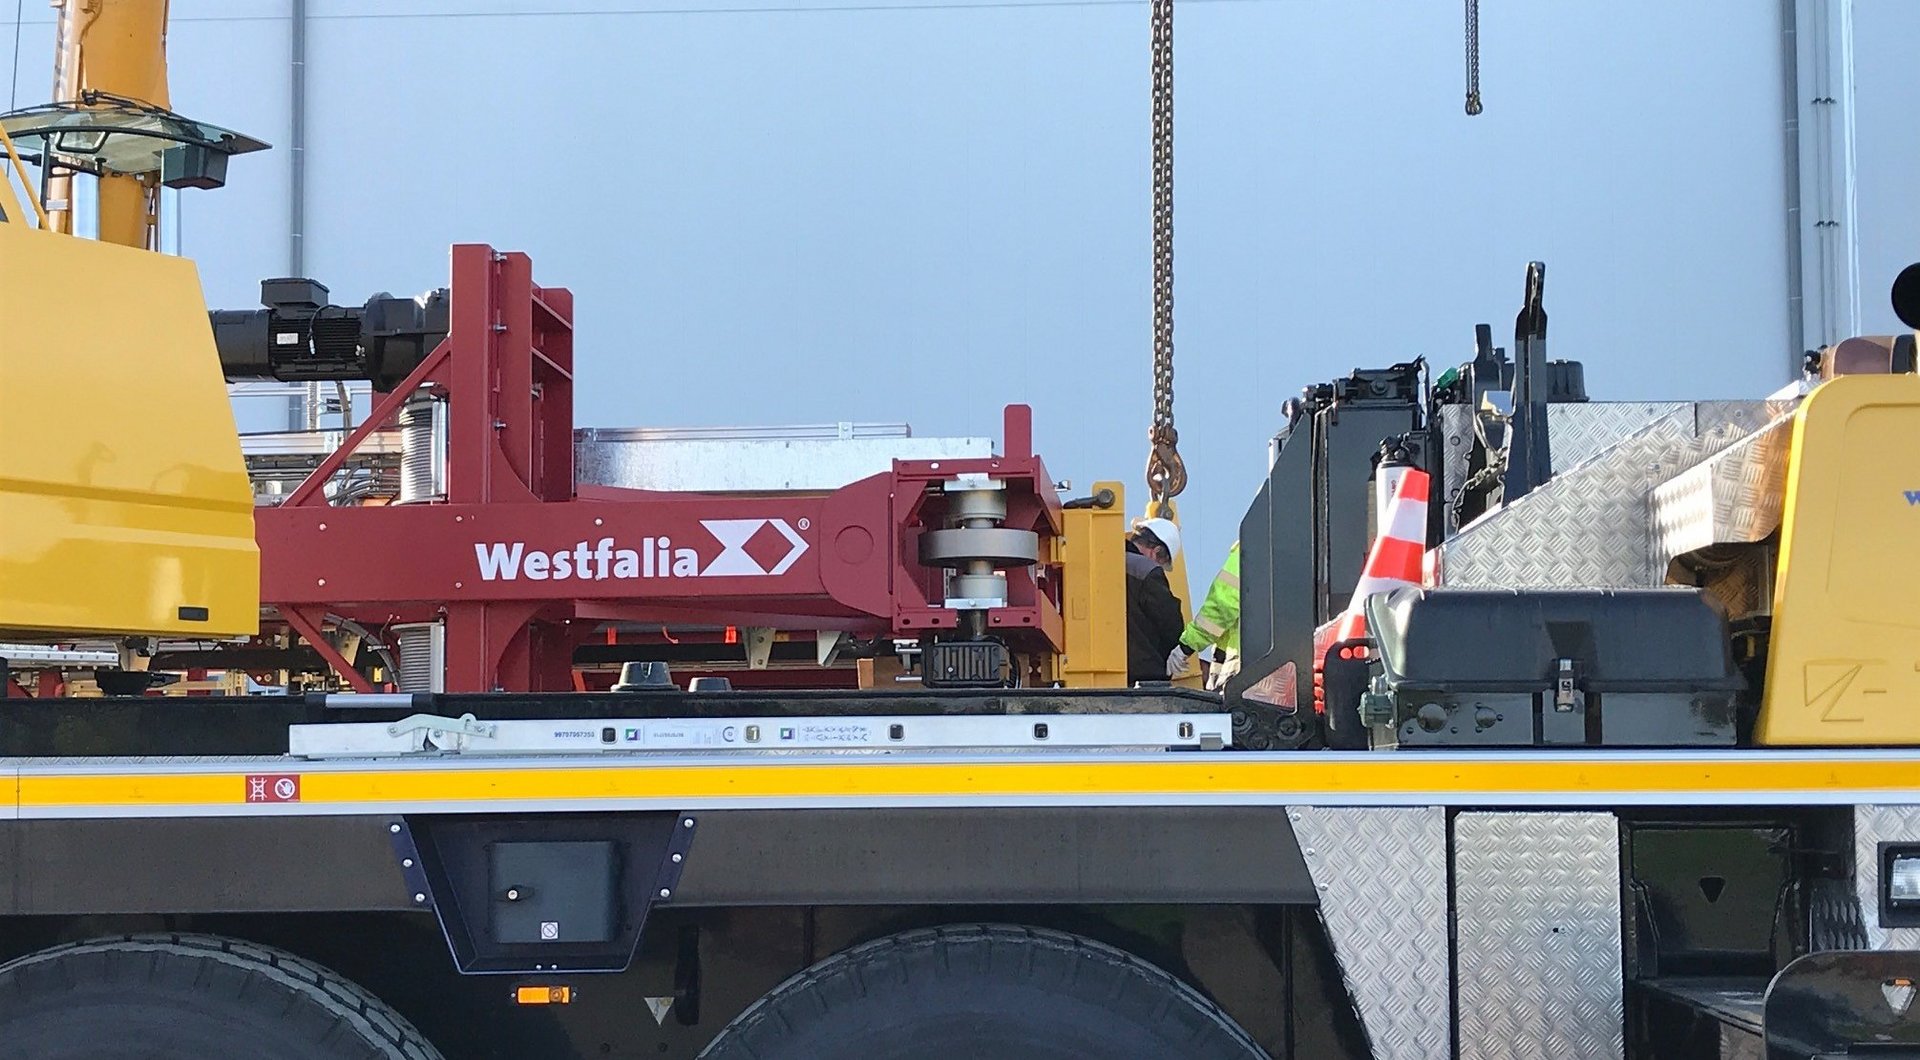 A crane lifts a storage and retrieval machine with the Westfalia logo for a fully automated cold storage facility in Lelystad, Lineage Logistics